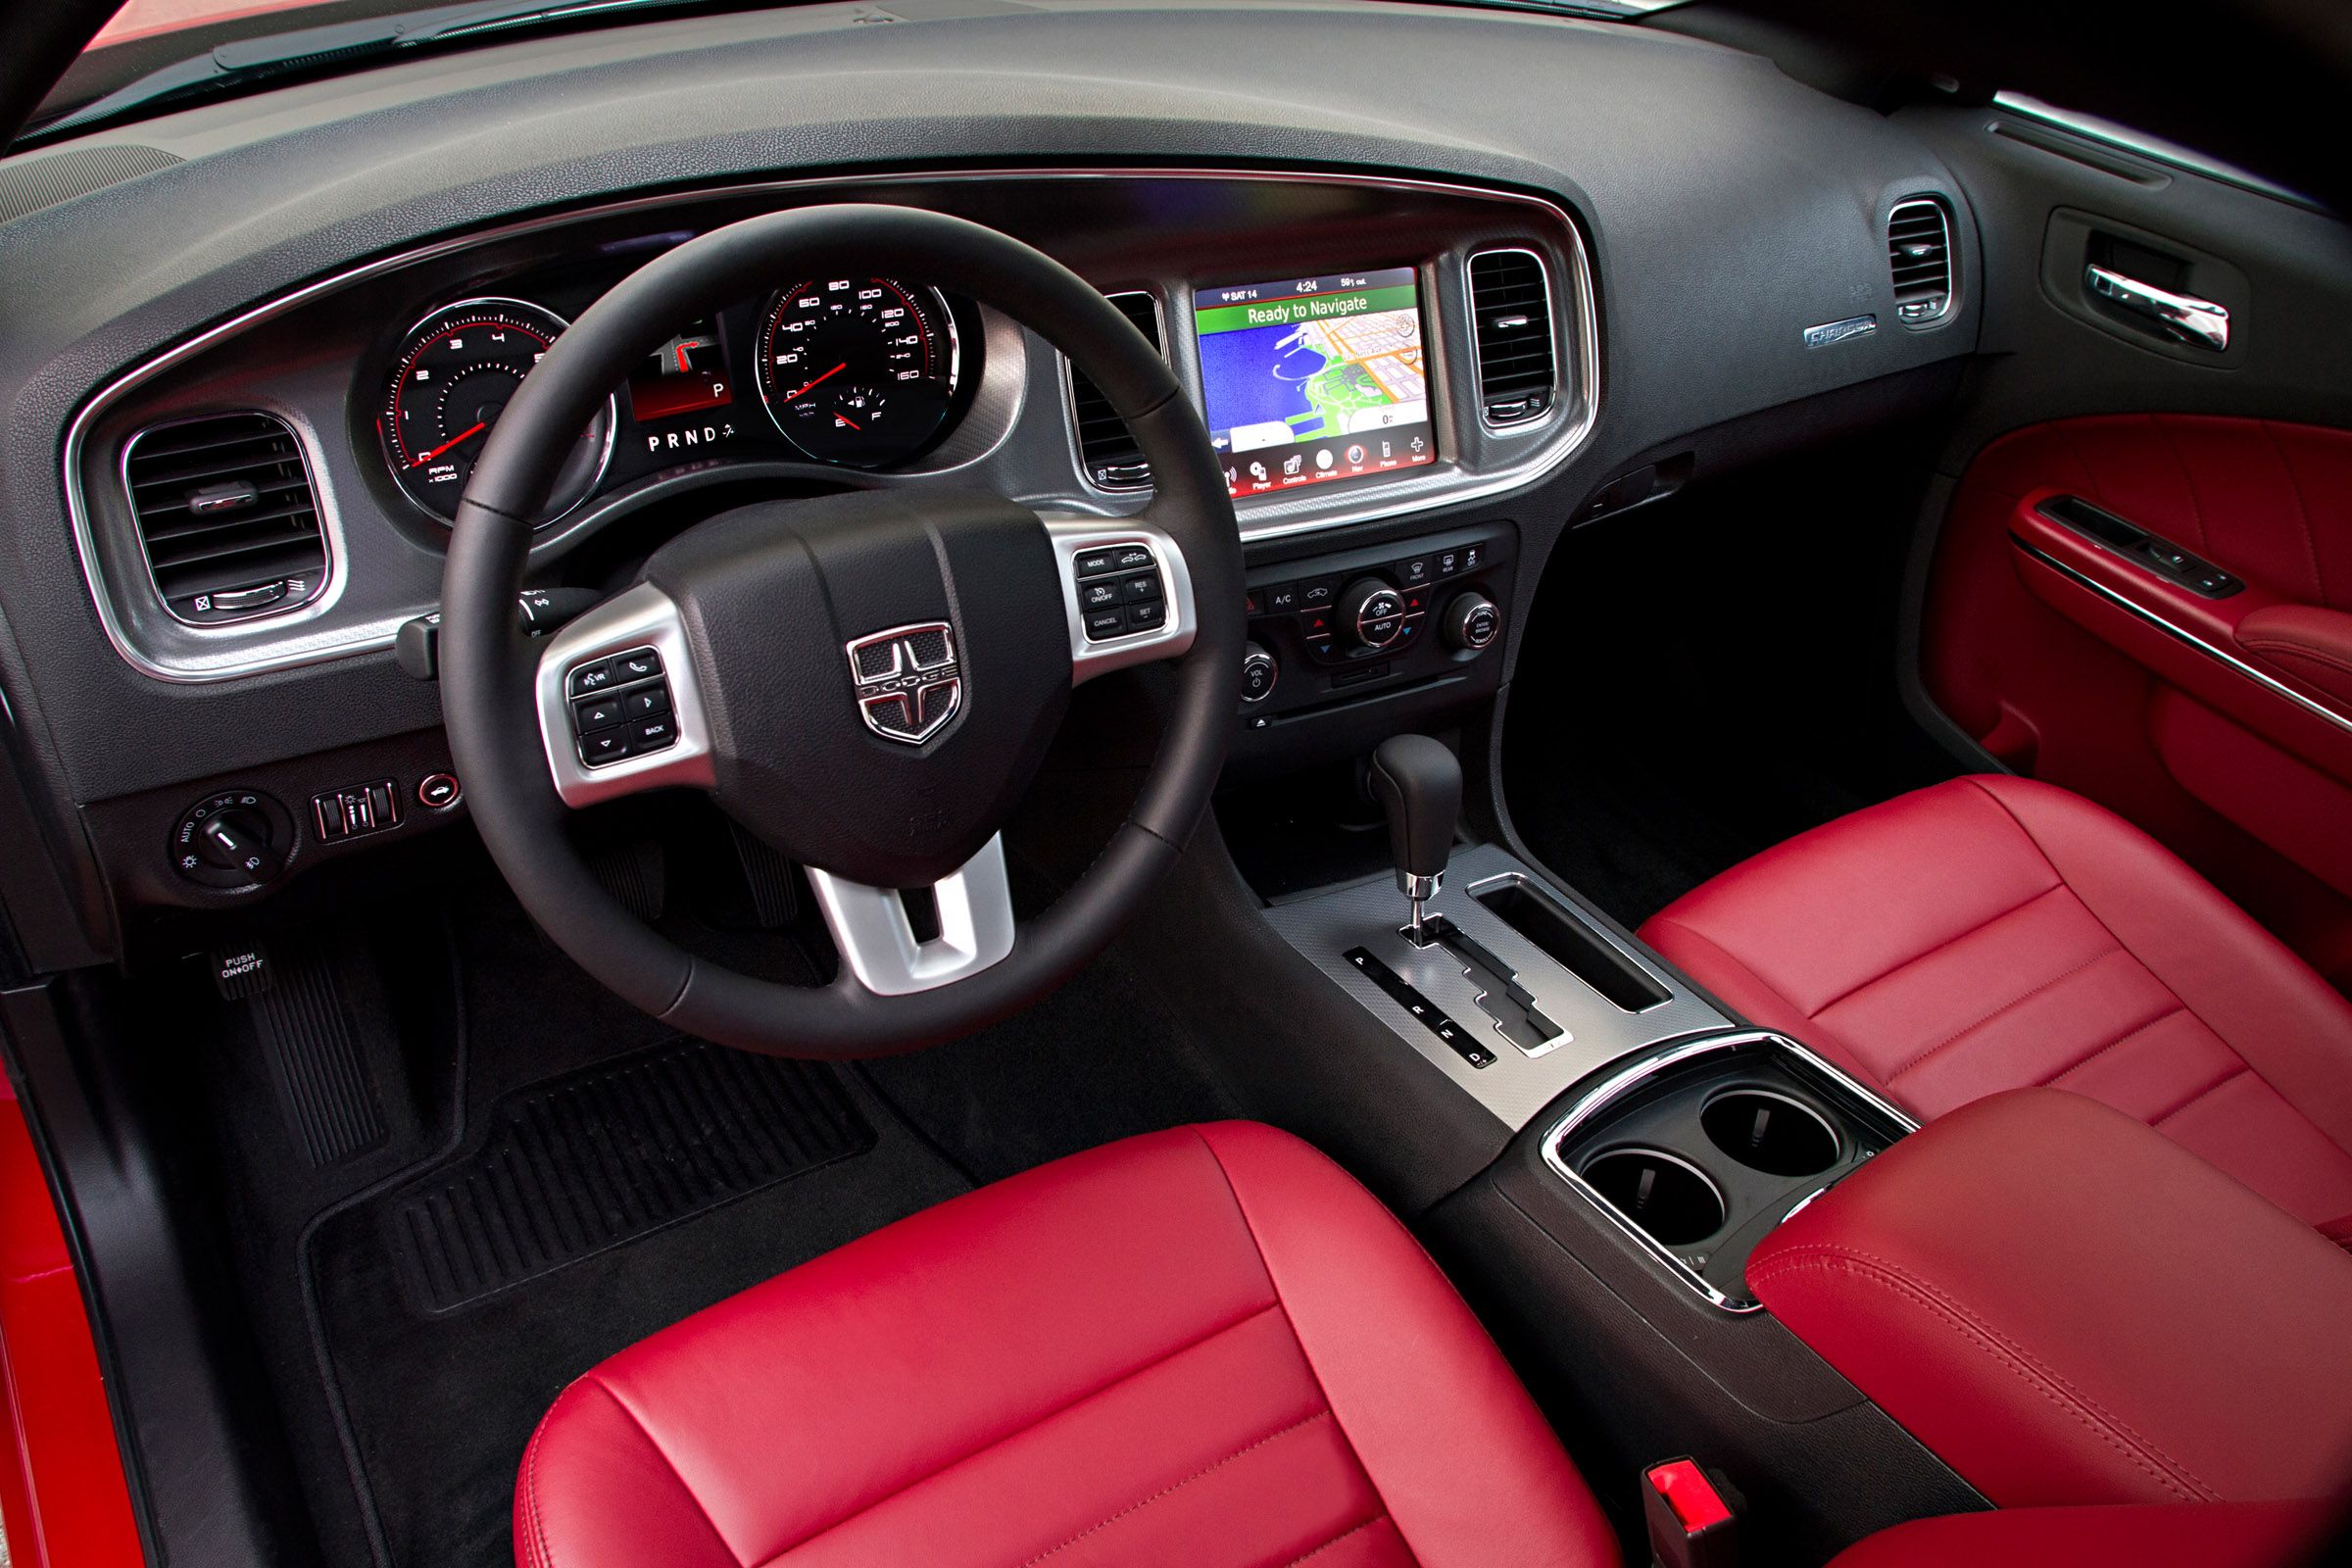 2012 Dodge Charger Rt Enhanced By Beats